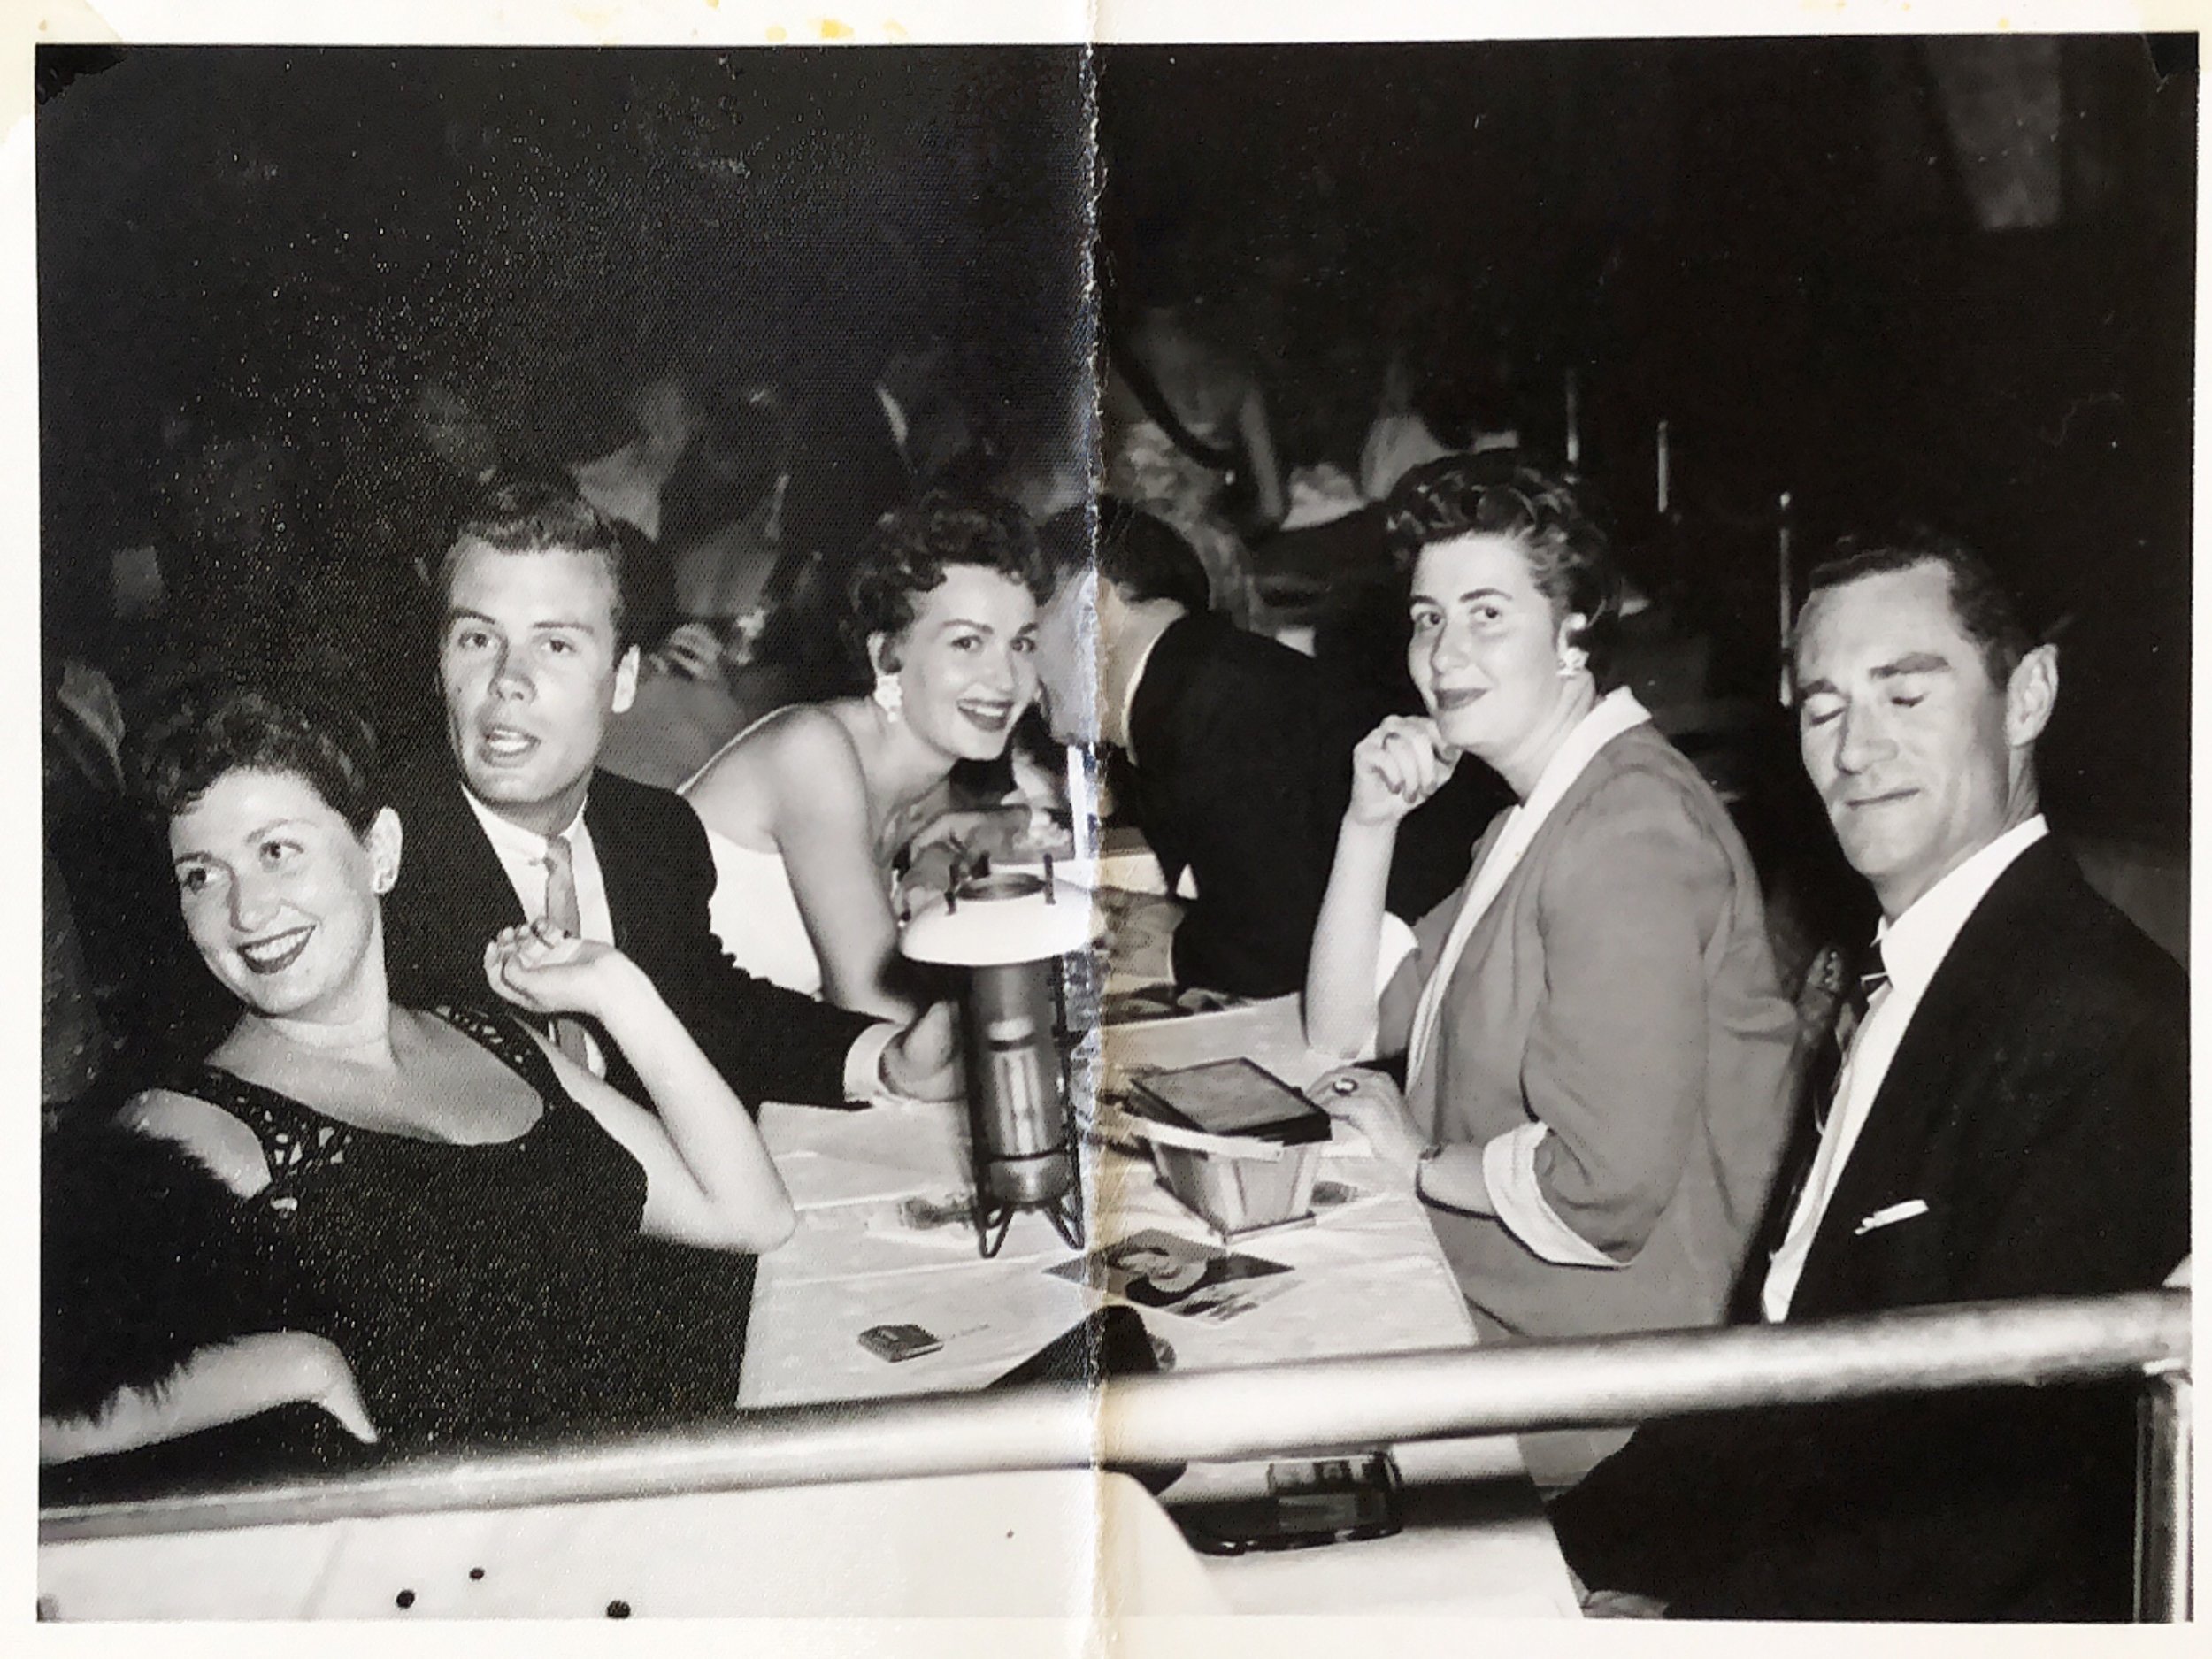  Bob's brother Bill may have gone with him to Las Vegas.  Bill (eyes closed) and Bob appear to be seated at a stage-side table in a nightclub (probably The Sands), and possibly with people they did not know. No others in photo identified. The Robins 